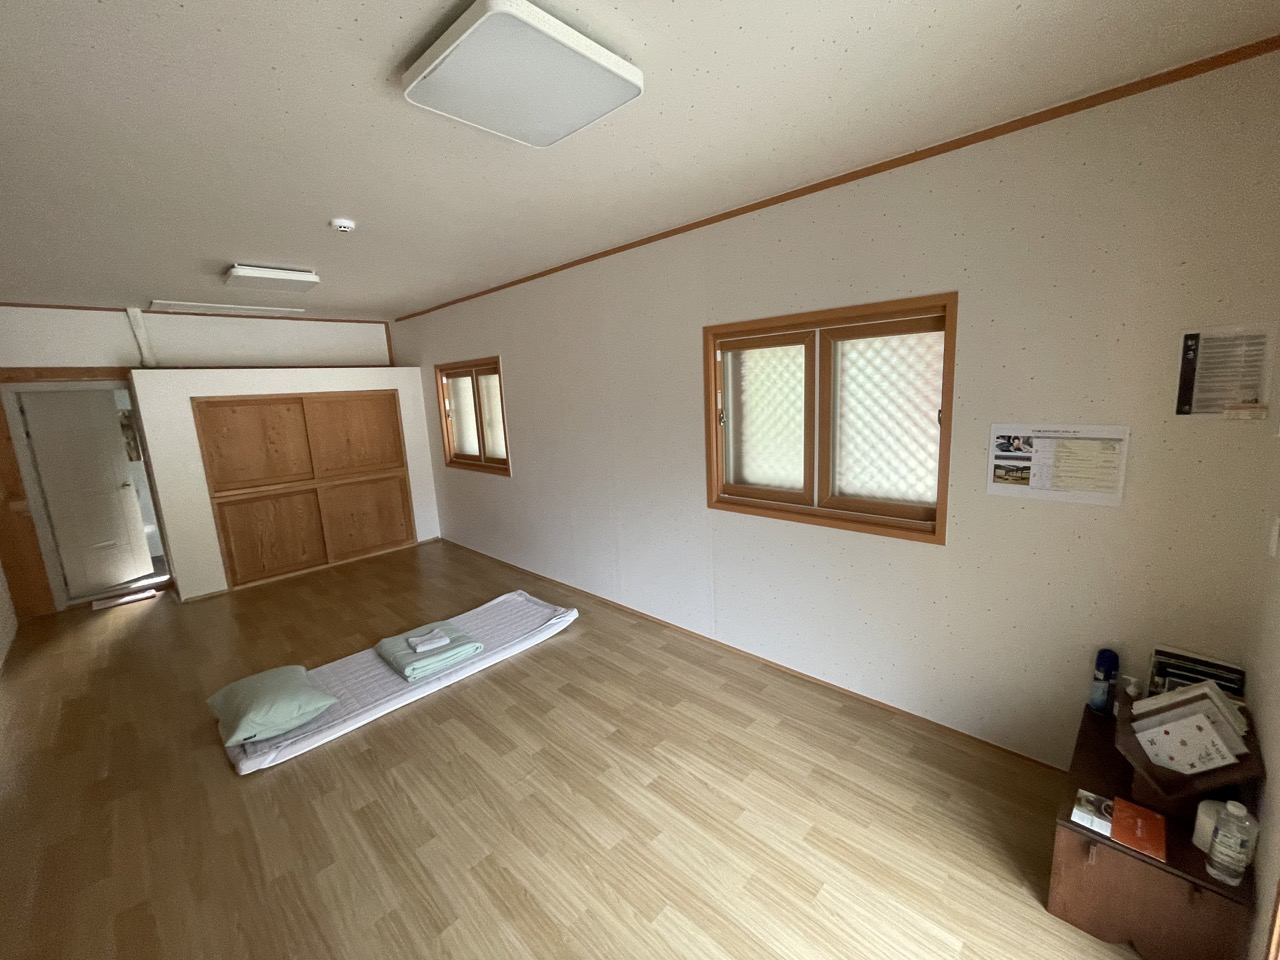 Baekyangsa's templestay rooms can accommodate up to five people. (Park Ga-young/The Korea Herald)